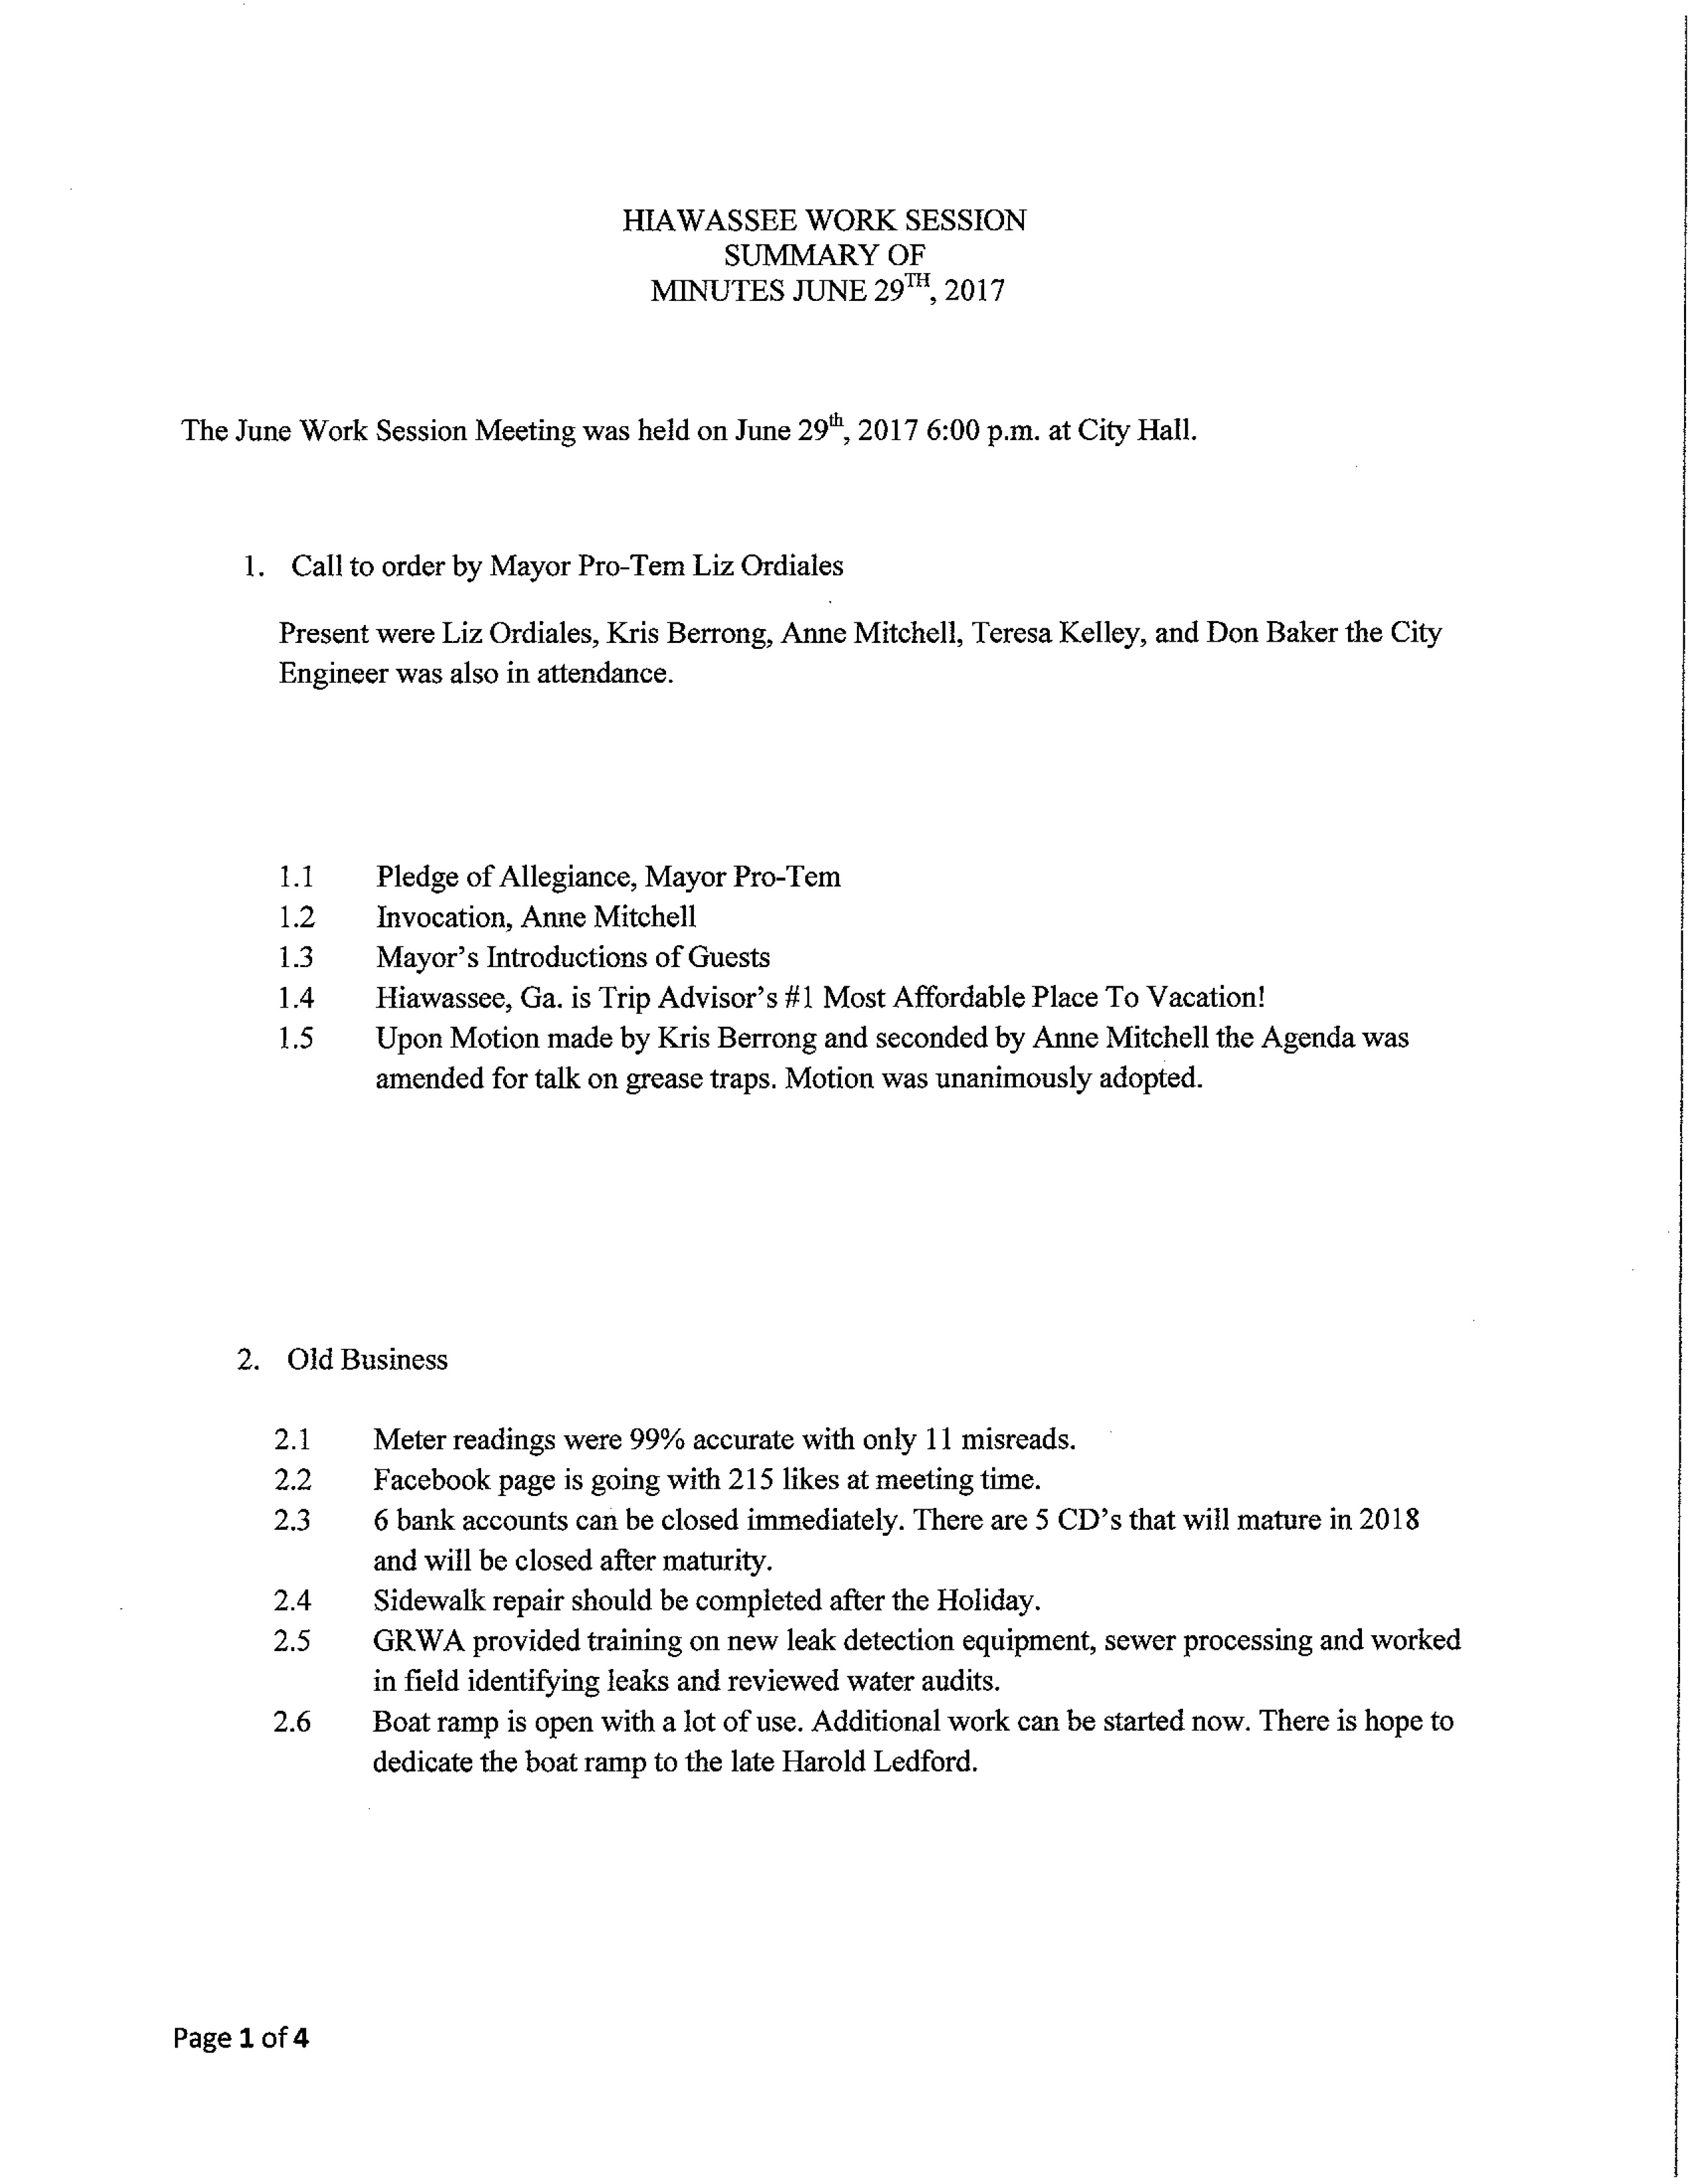 June 29 work session agenda and minutes